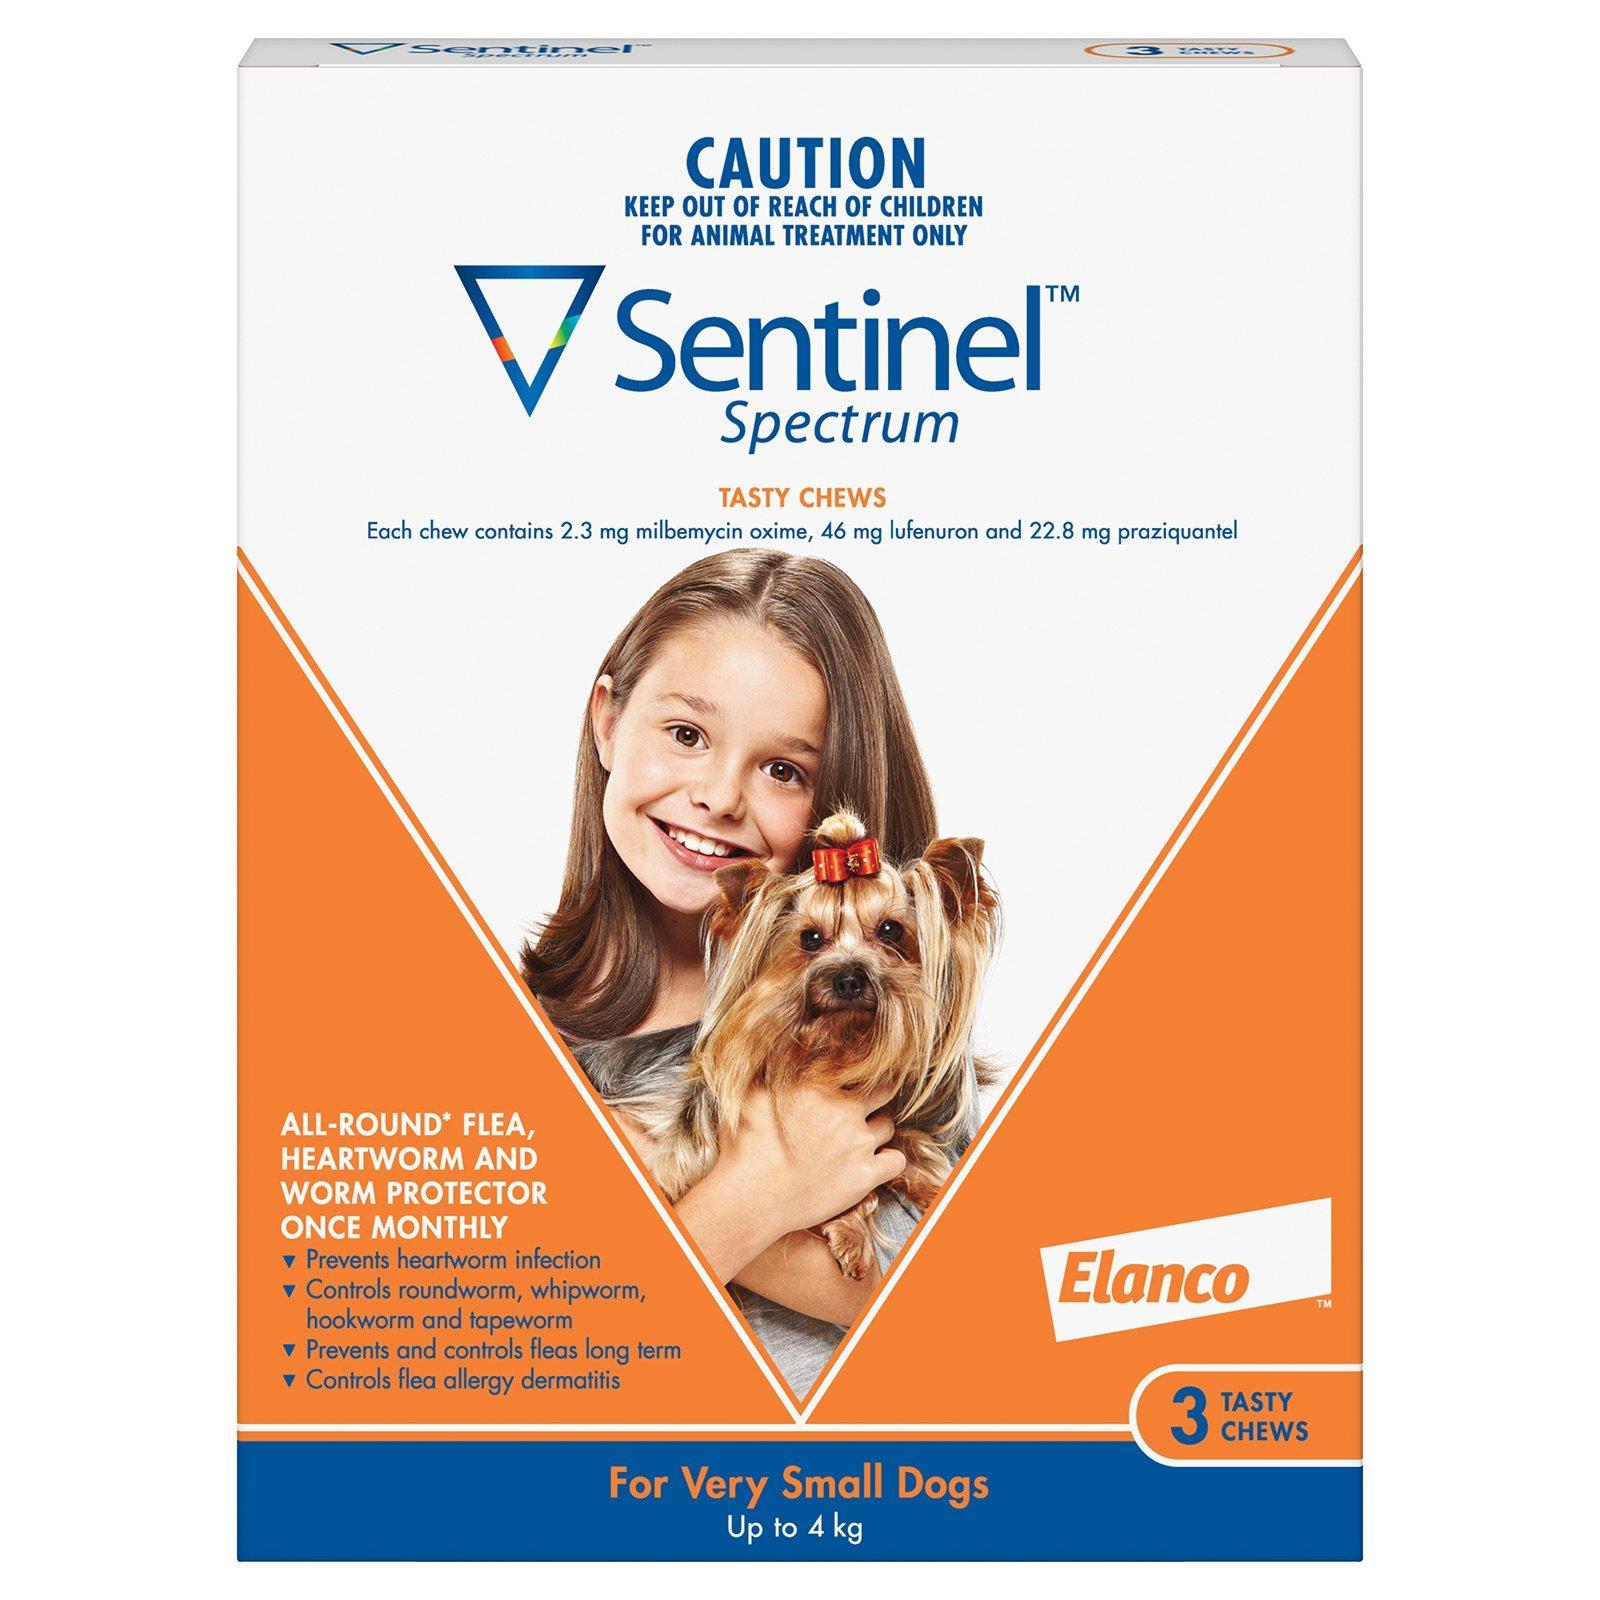 Sentinel Spectrum Tasty Chews For Very Small Dogs Up To 4Kg (Orange) 6 Chews